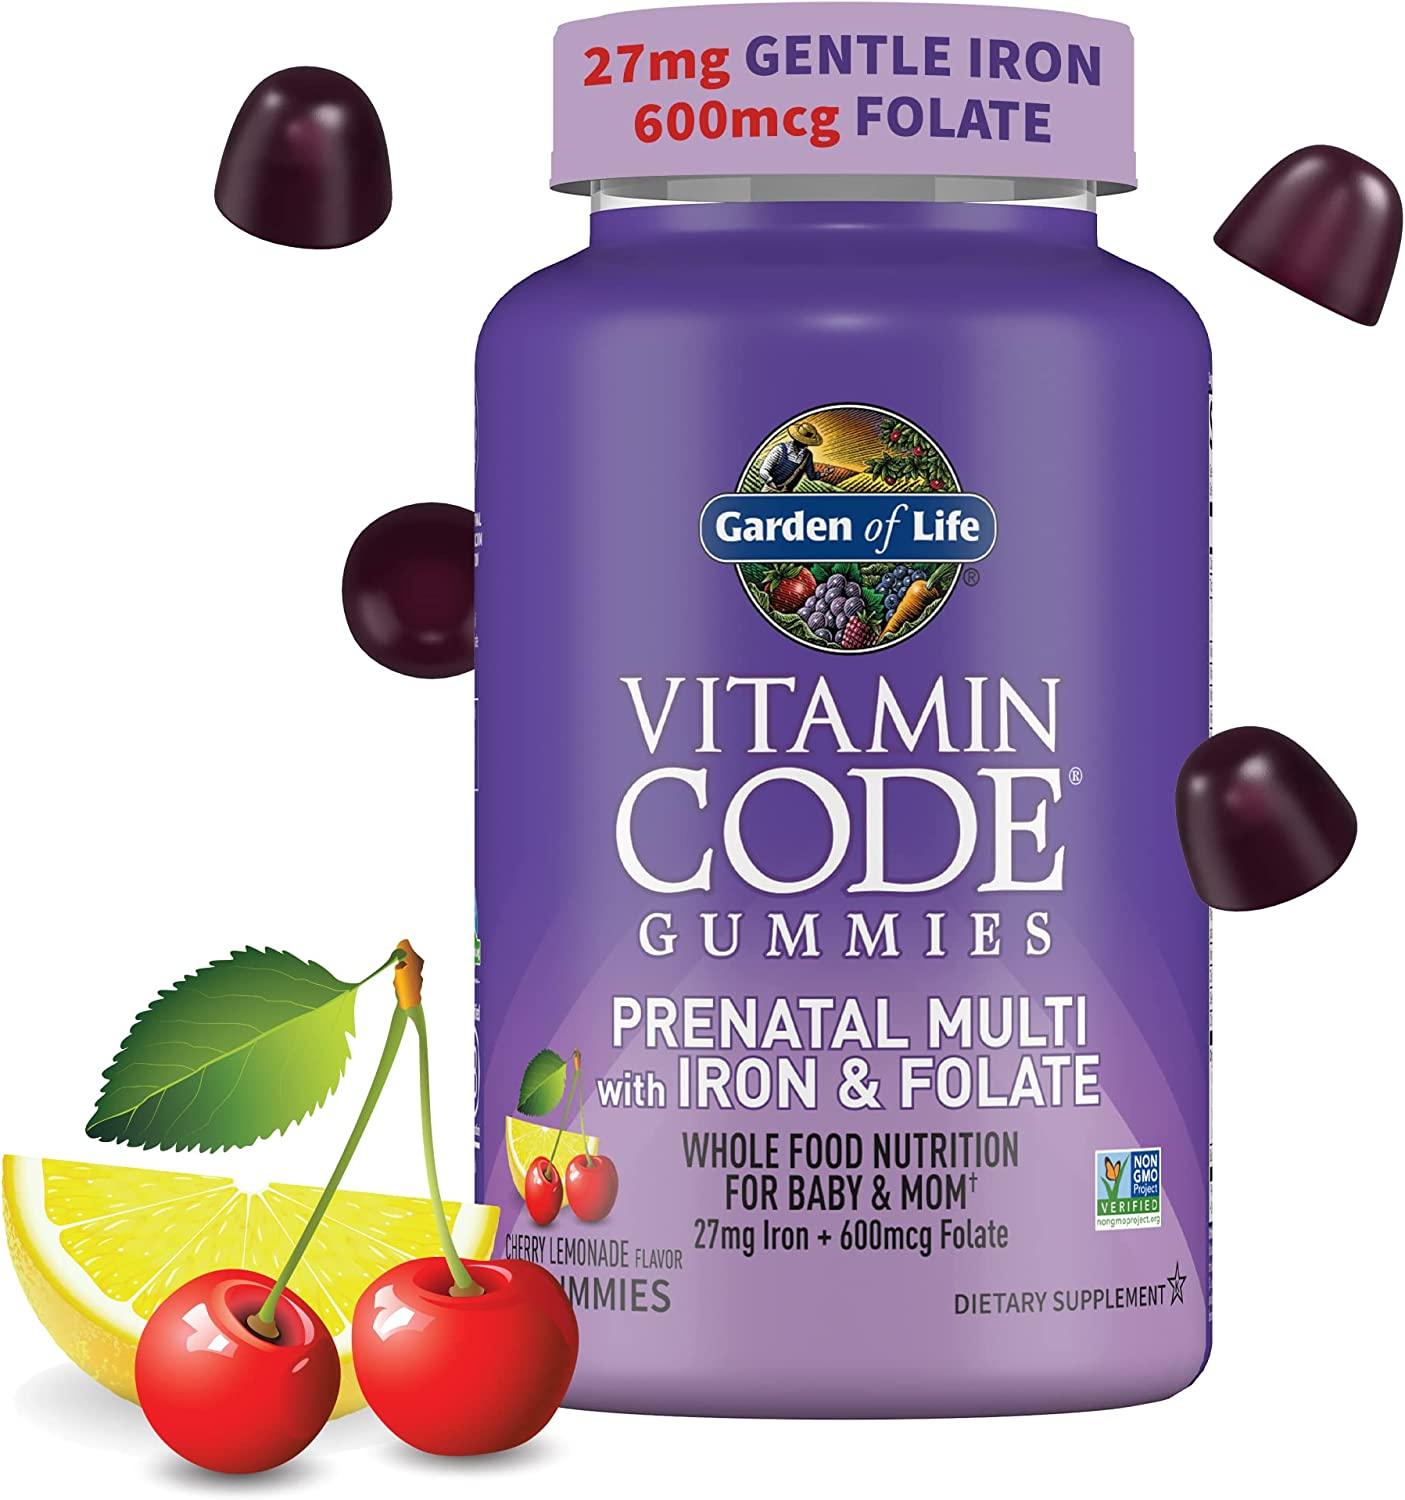 Garden of Life Vitamin Code Gummies Prenatal Multi with Iron & Folate (90 Gummies) - Buy at New Green Nutrition